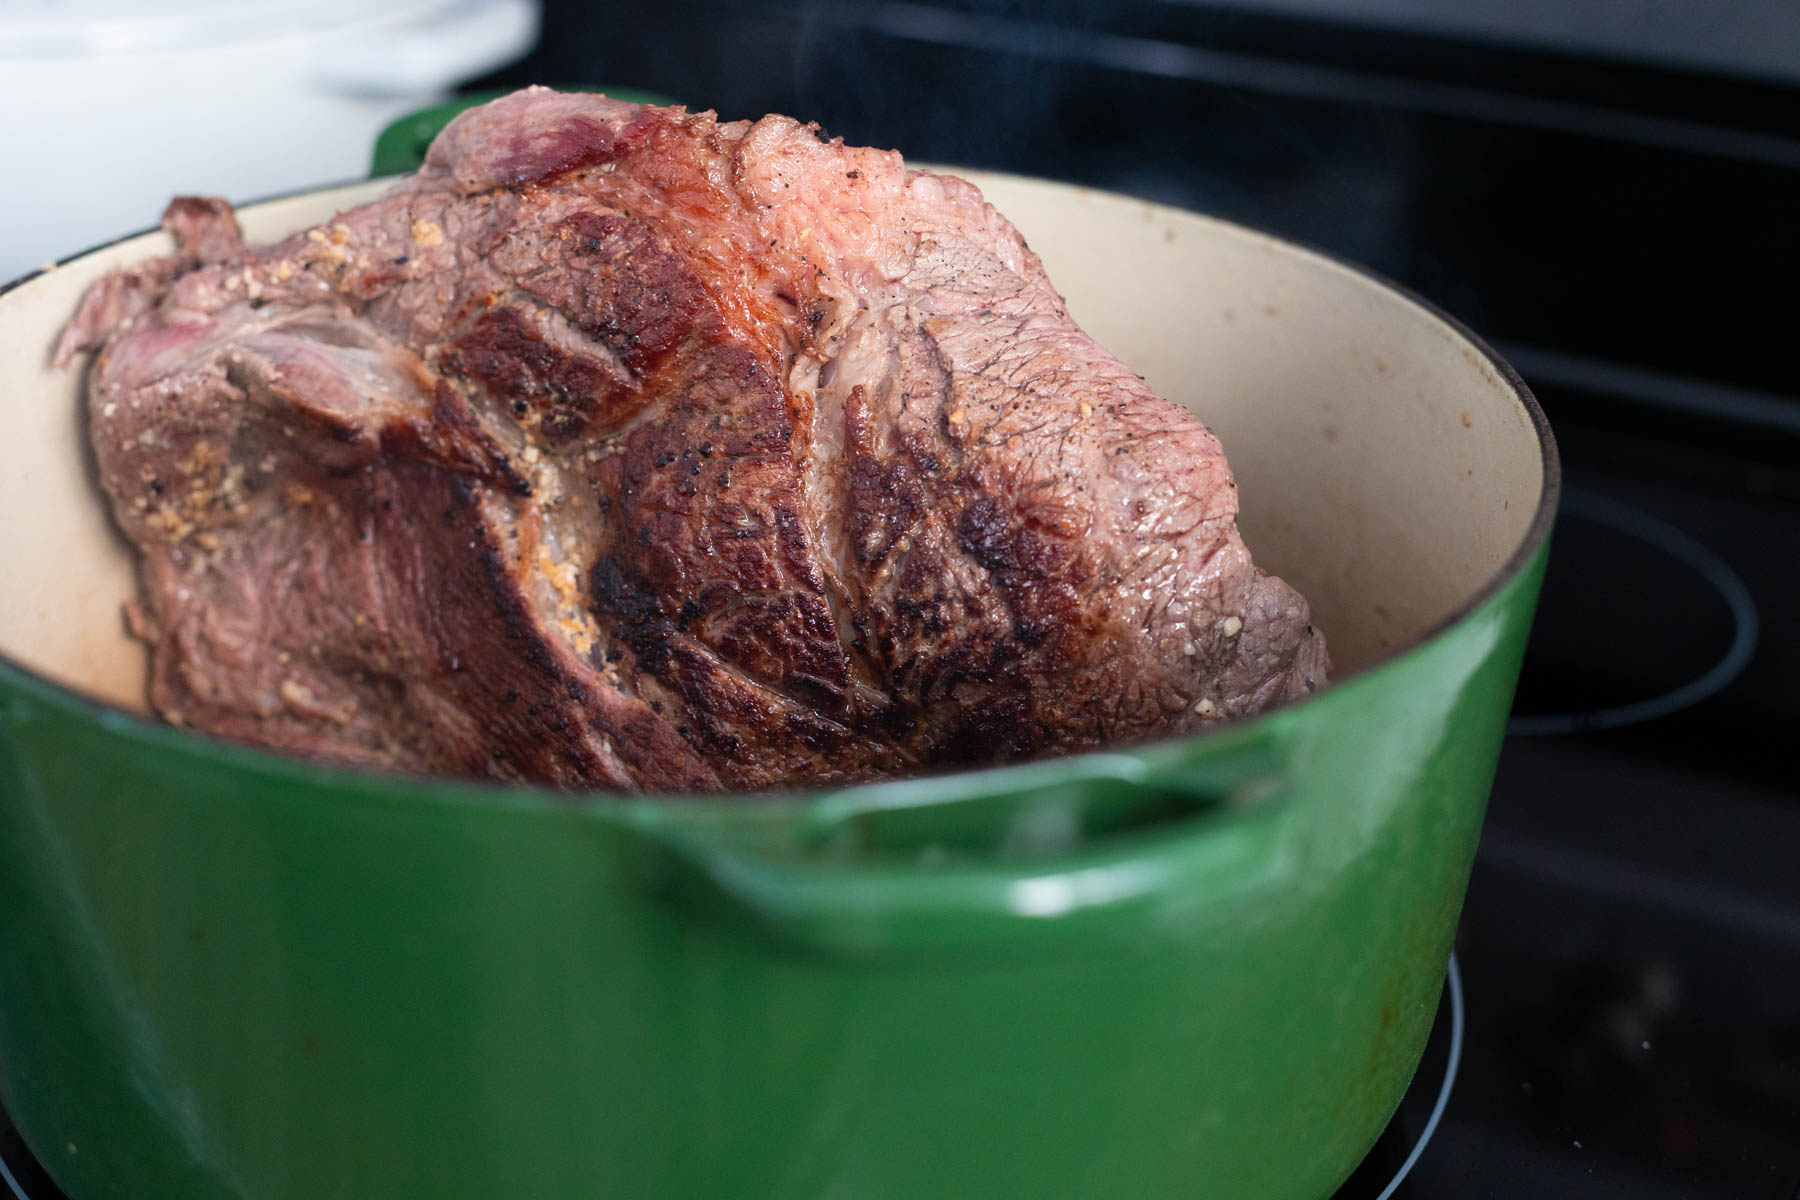 The large roast is in a large dutch oven getting seared on all sides.